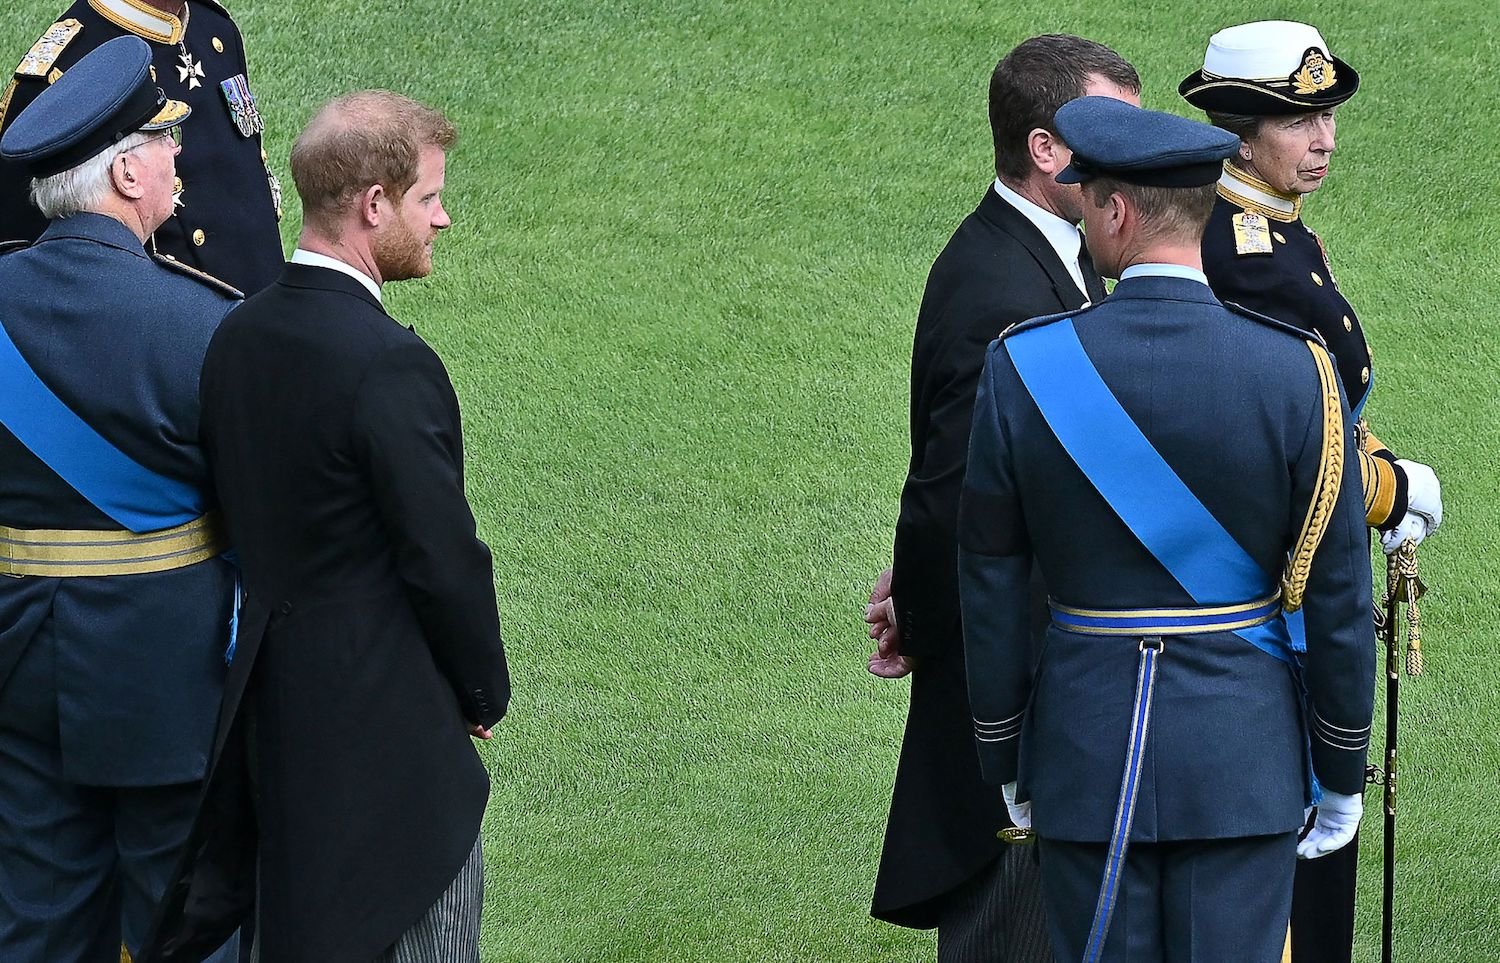 Prince Harry and Prince William body language at Queen Elizabeth funeral waiting to join procession